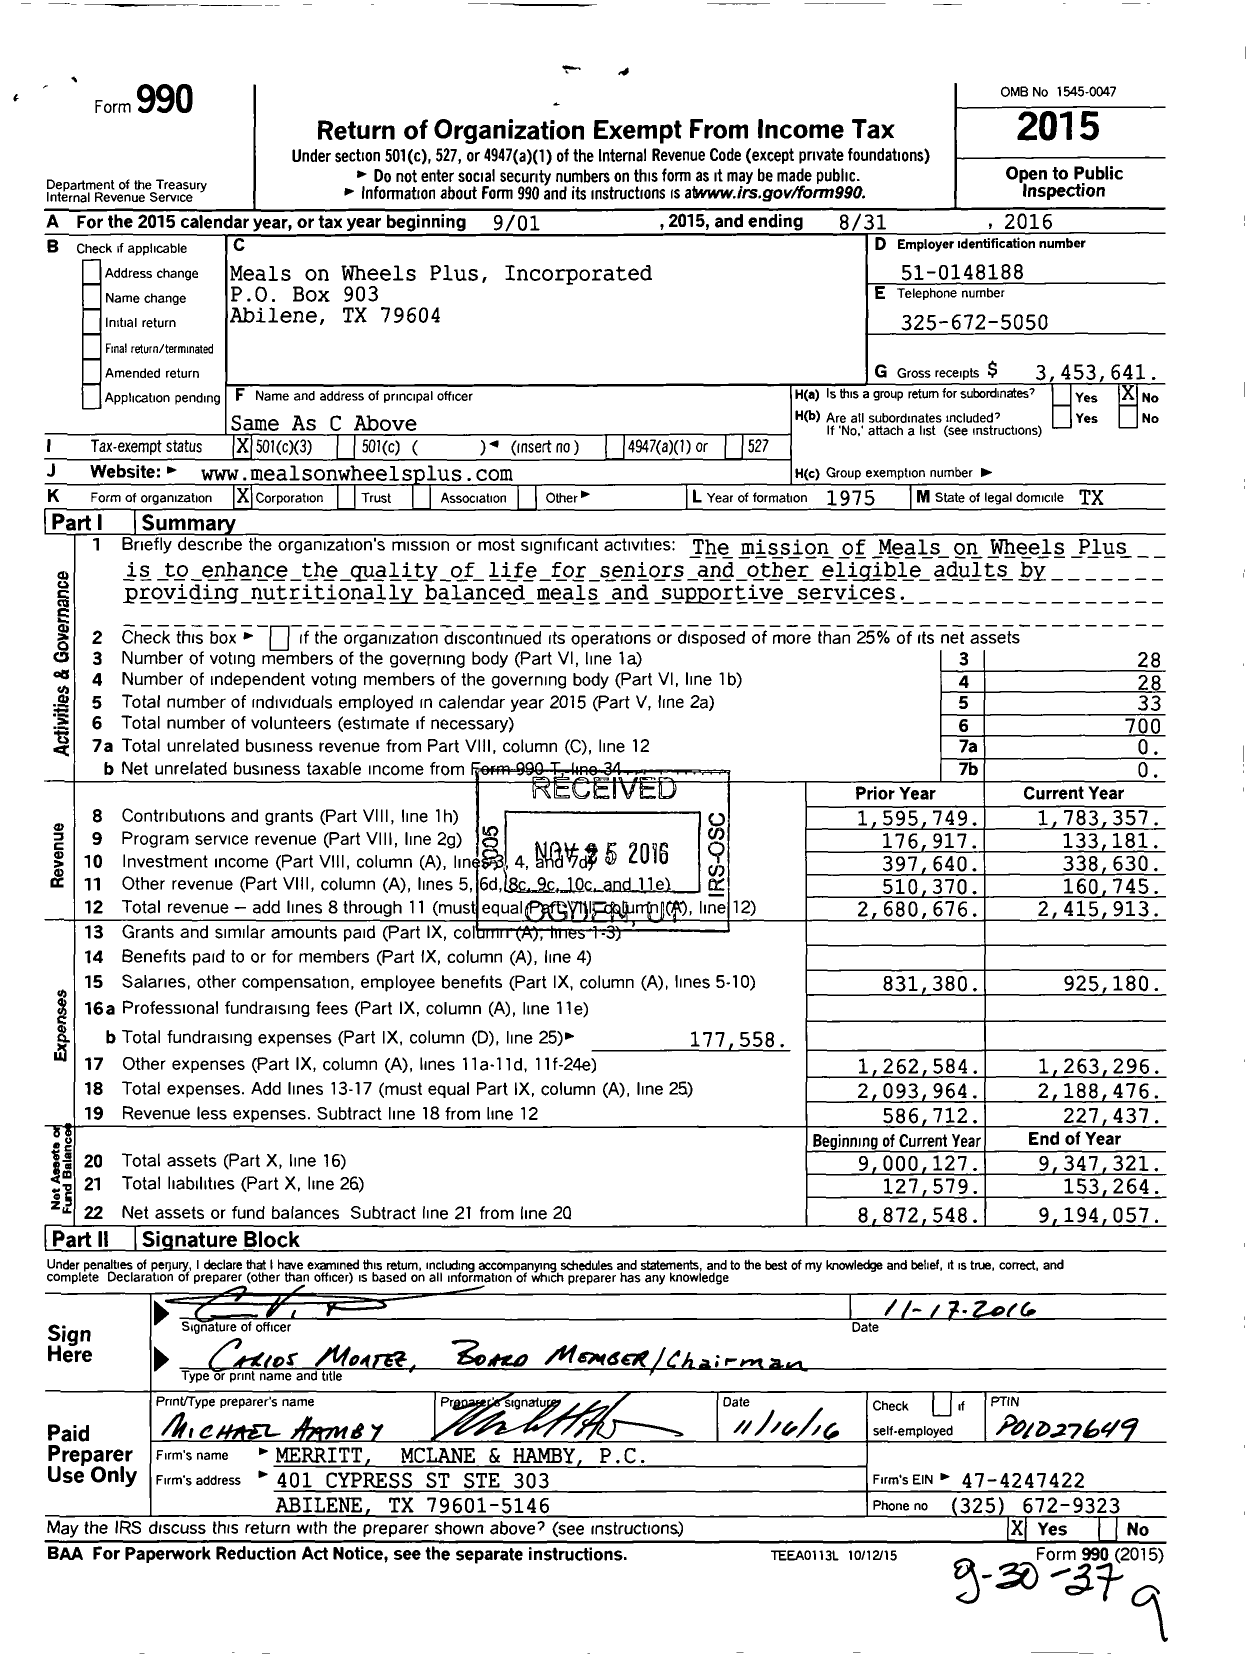 Image of first page of 2015 Form 990 for Meals on Wheels Plus Incorporated